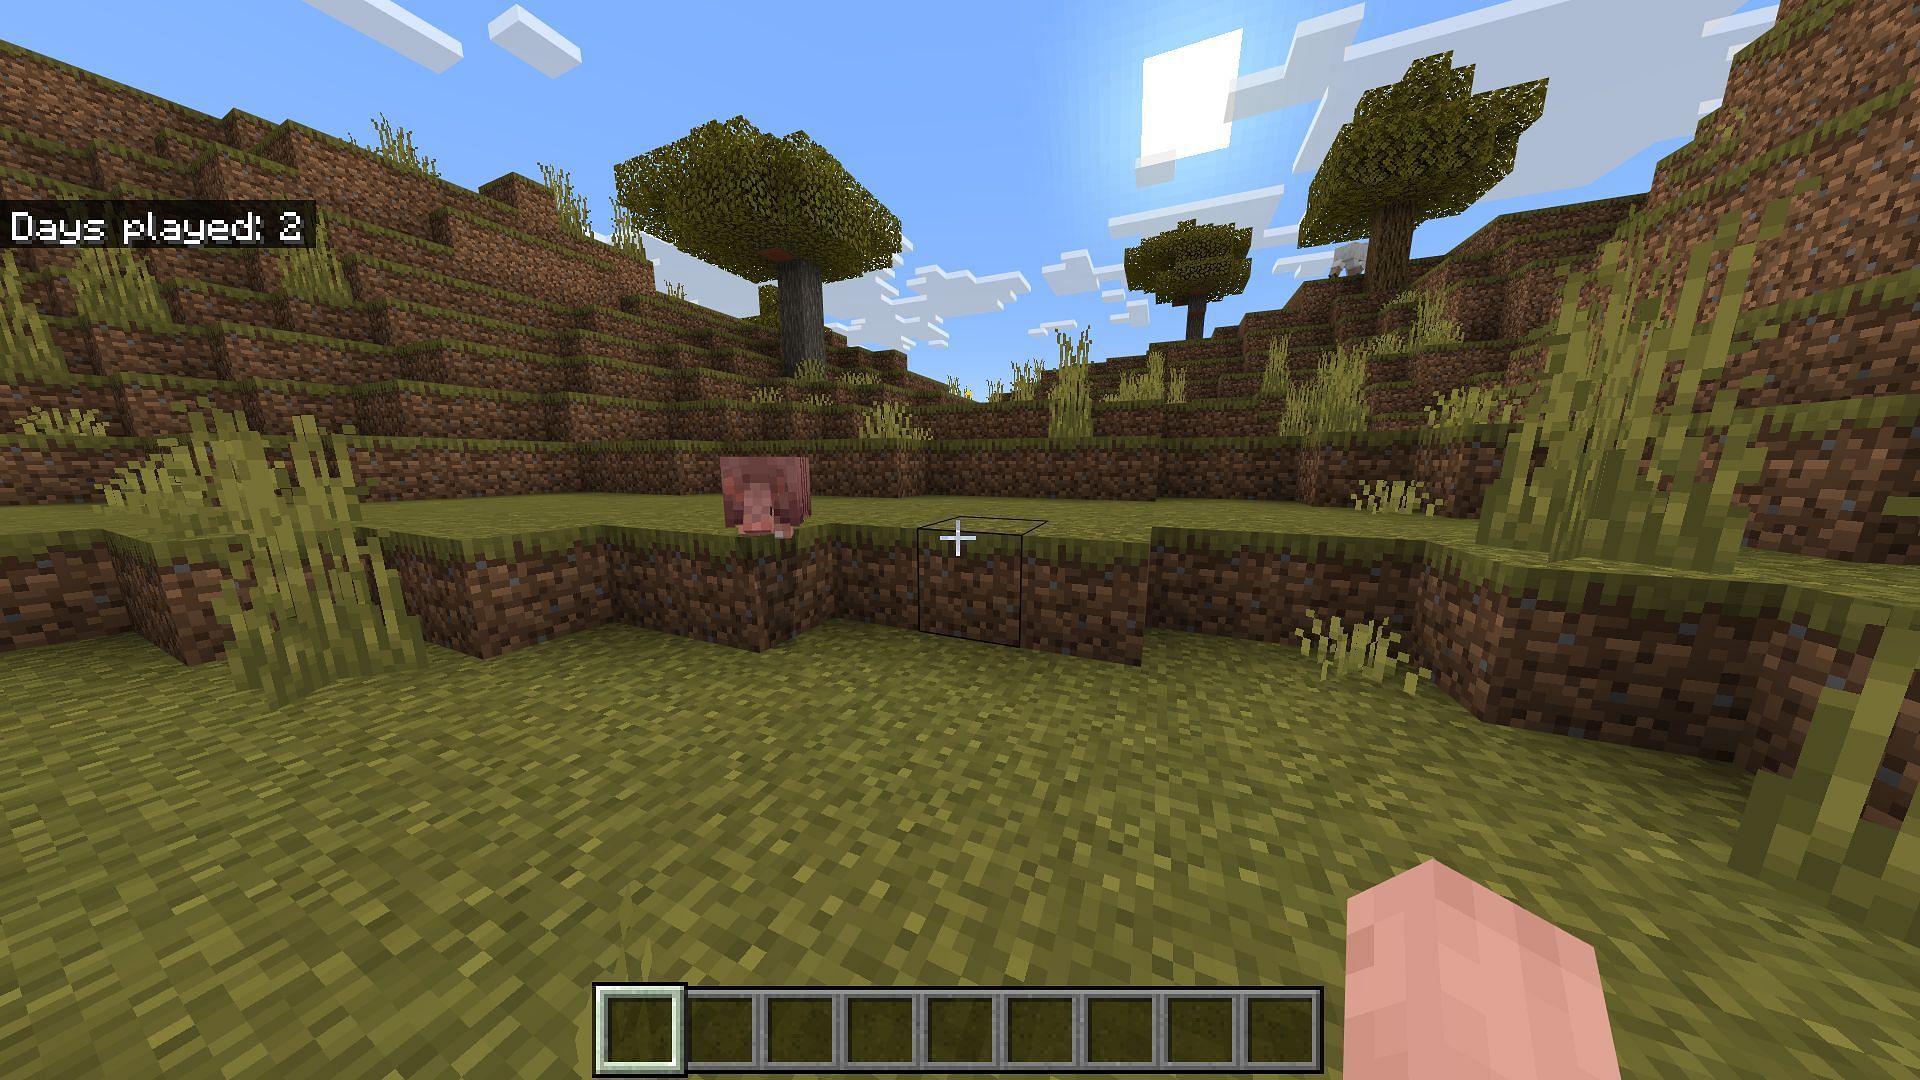 An oft-requested feature has finally made its way to Preview 1.21.0.23 (Image via Mojang)